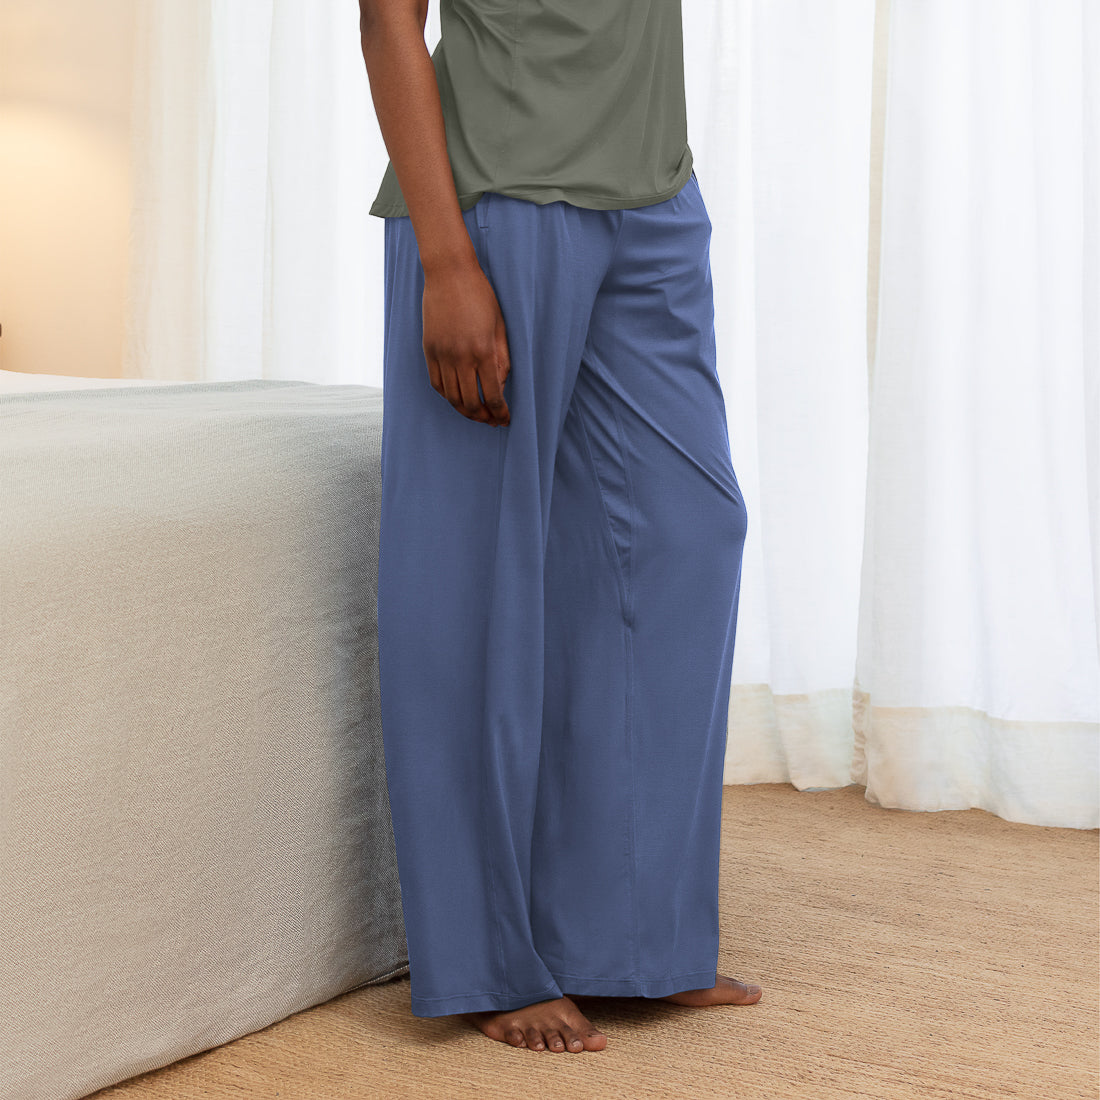 Women's Pajama pants are a perfect lounge comfortable casual wear Stylish  Ai graphics made for lounging and sleeping - Pants